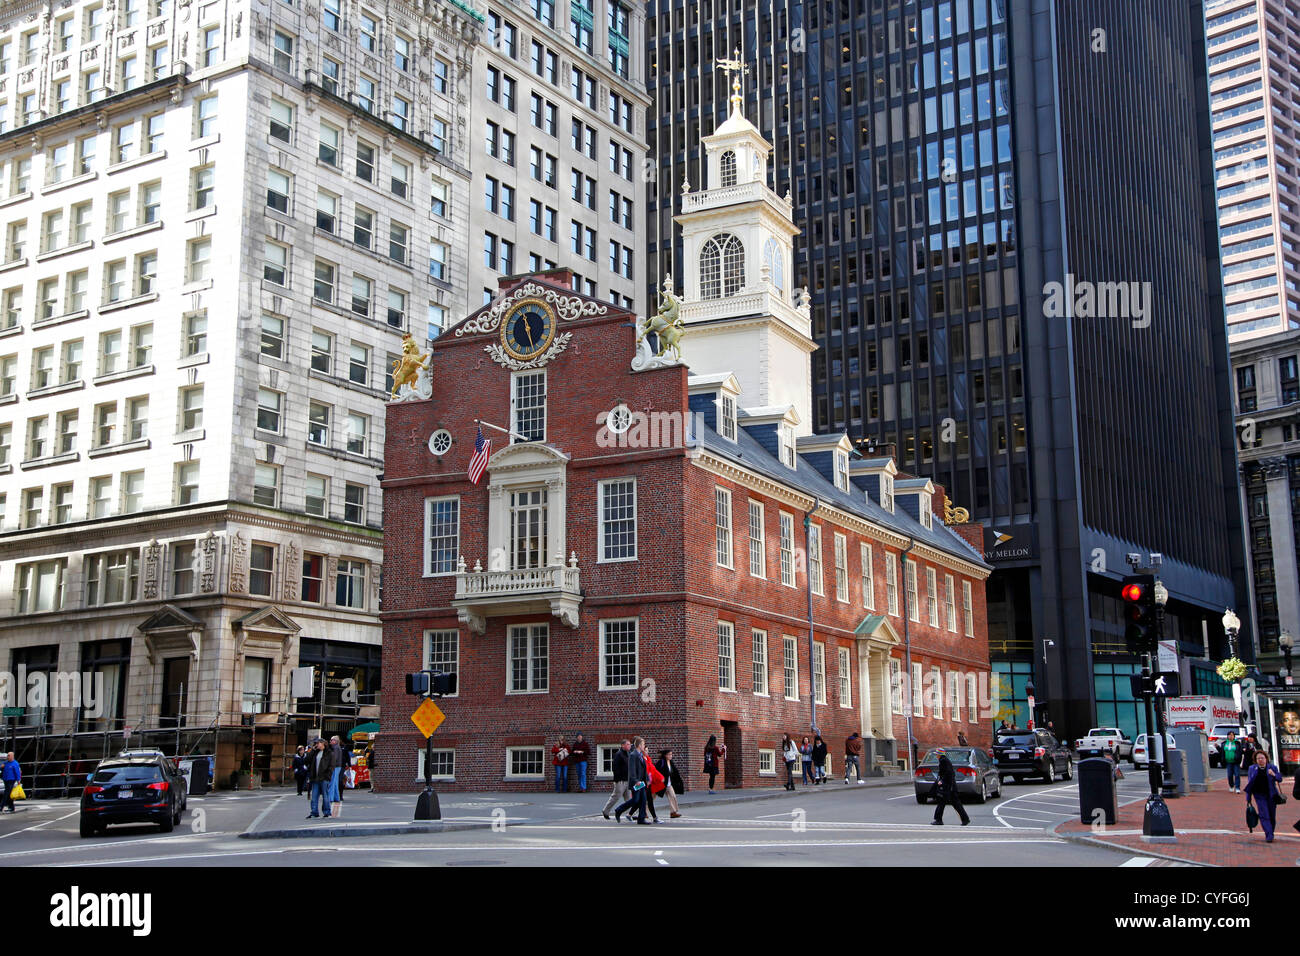 L'Old State House, Boston, Massachusetts, Nord Banque D'Images